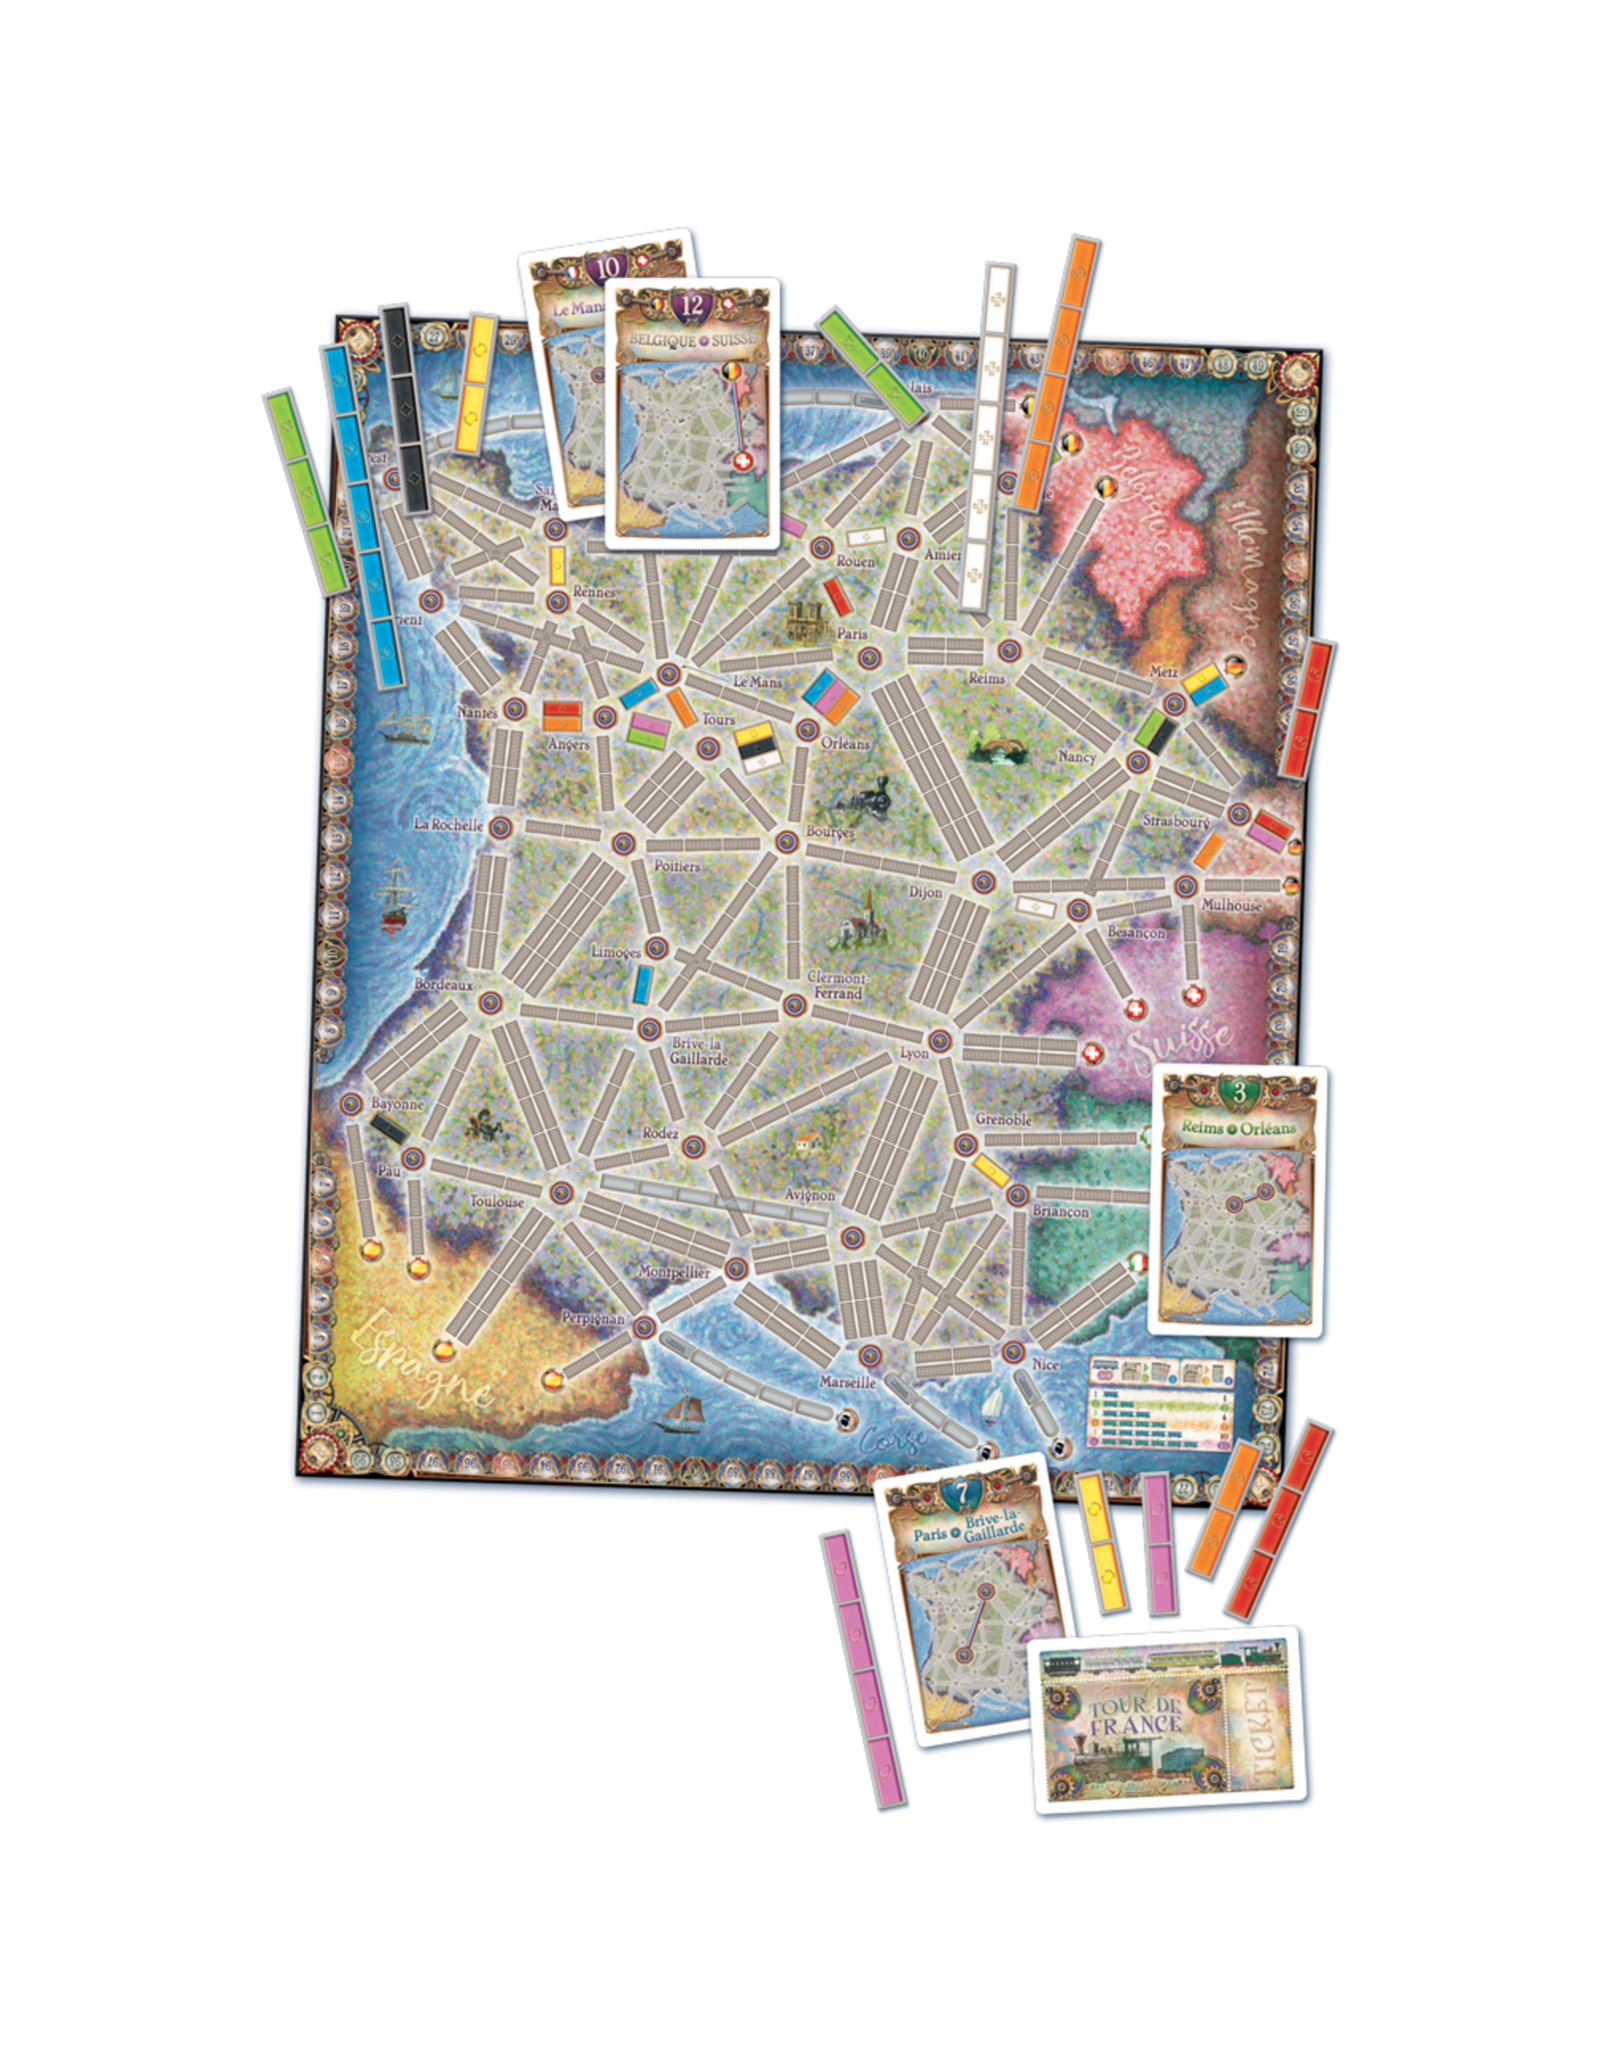 Ticket to Ride France